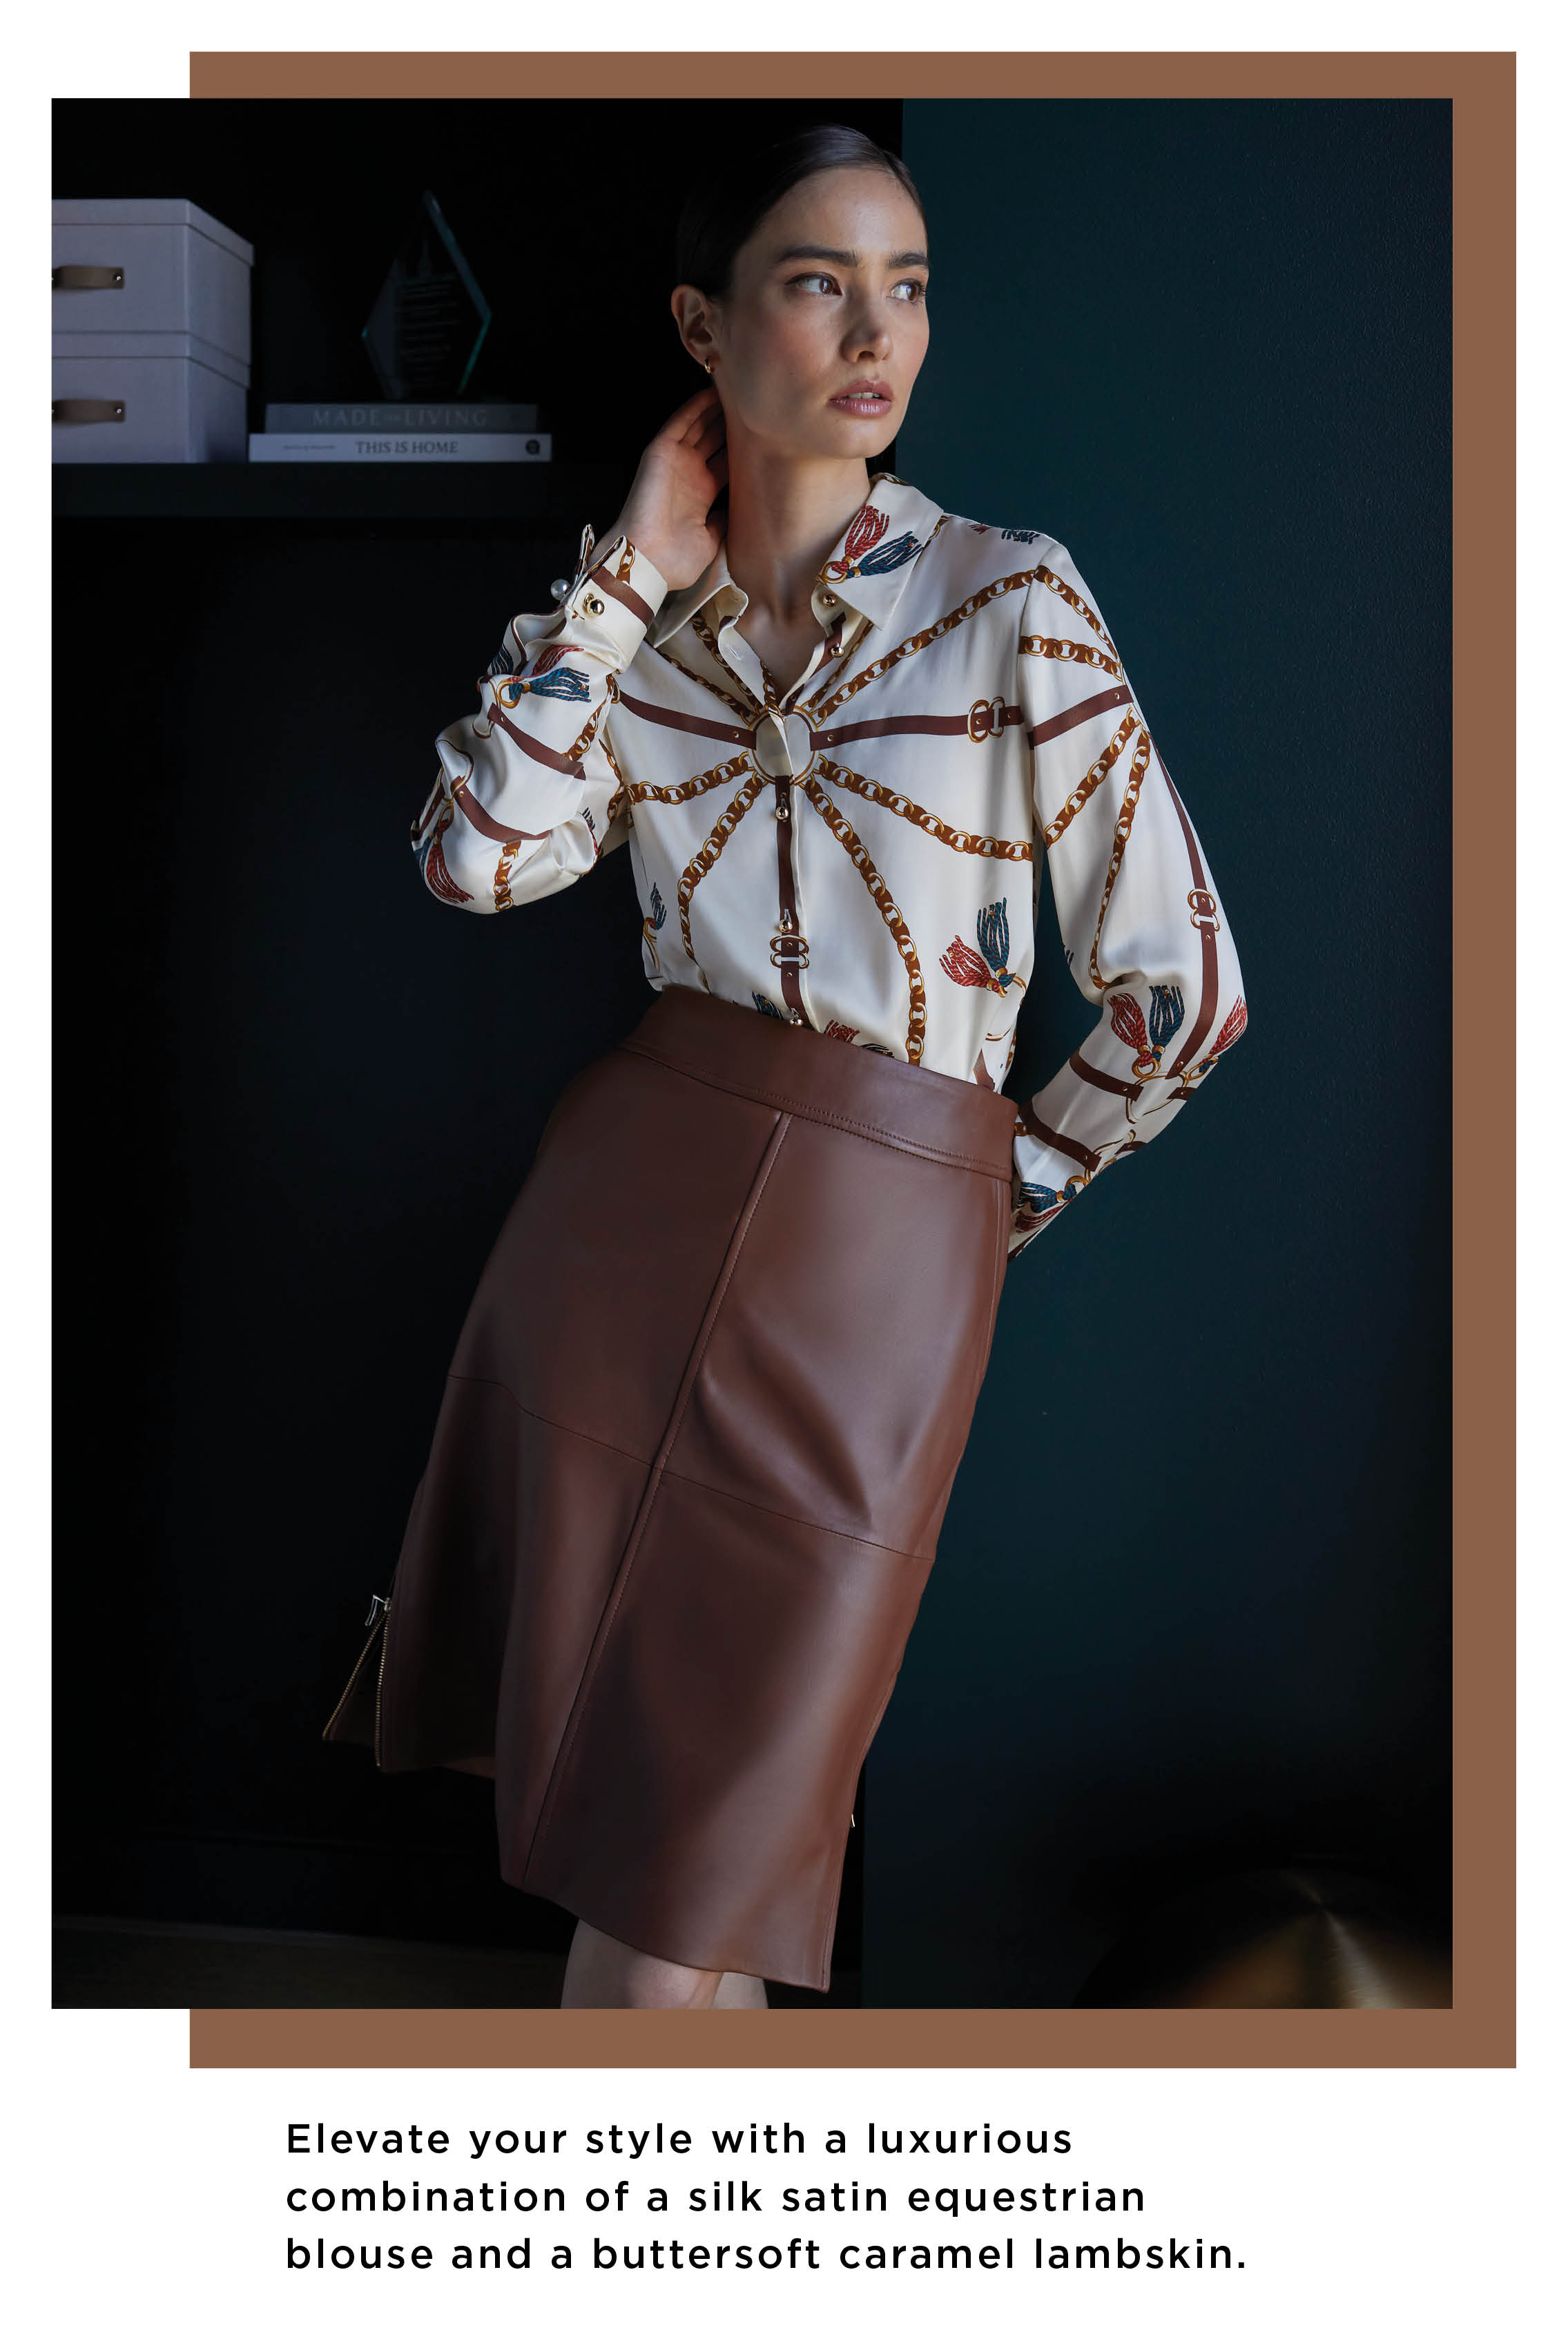 Experience a fusion of elegance and equestrian charm with a captivating silk satin blouse in a stunning livery print. The deep caramel lambskin A-line skirt beautifully complements the blouse, offering a touch of sophistication and timeless style.